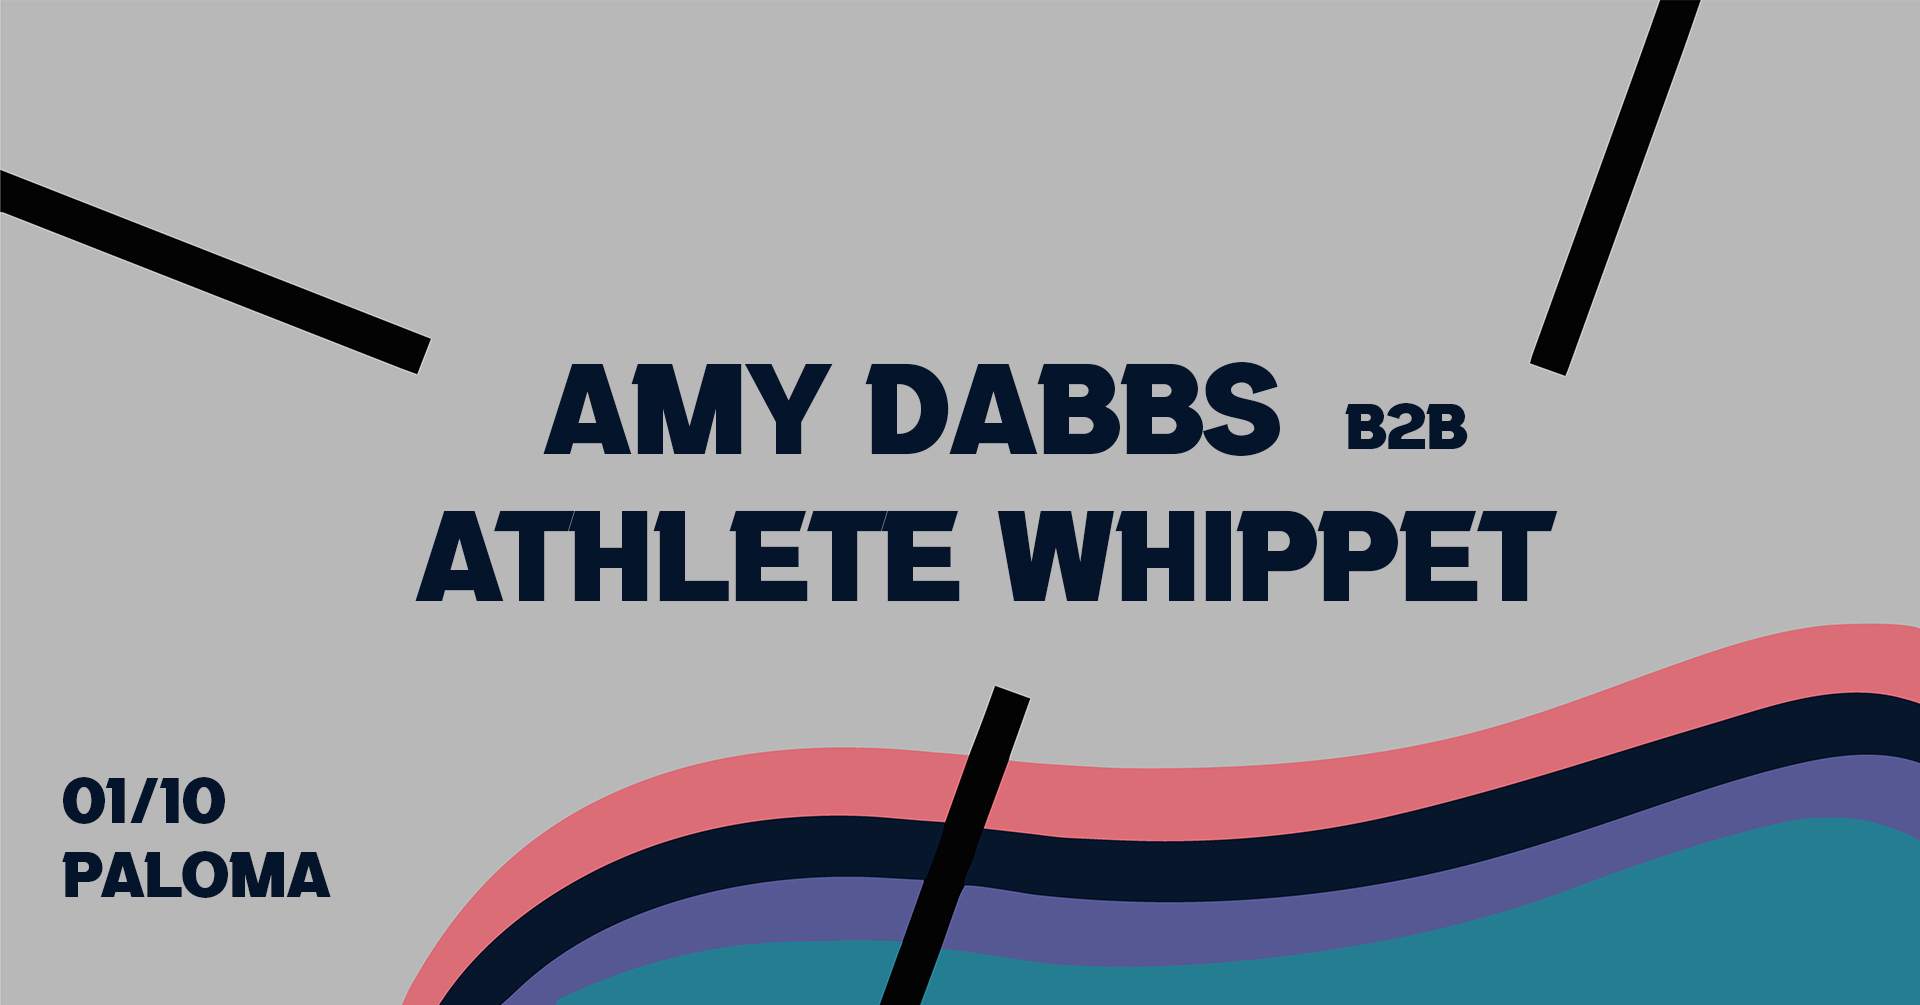 All Night with Amy Dabbs & Athlete Whippet - Flyer front